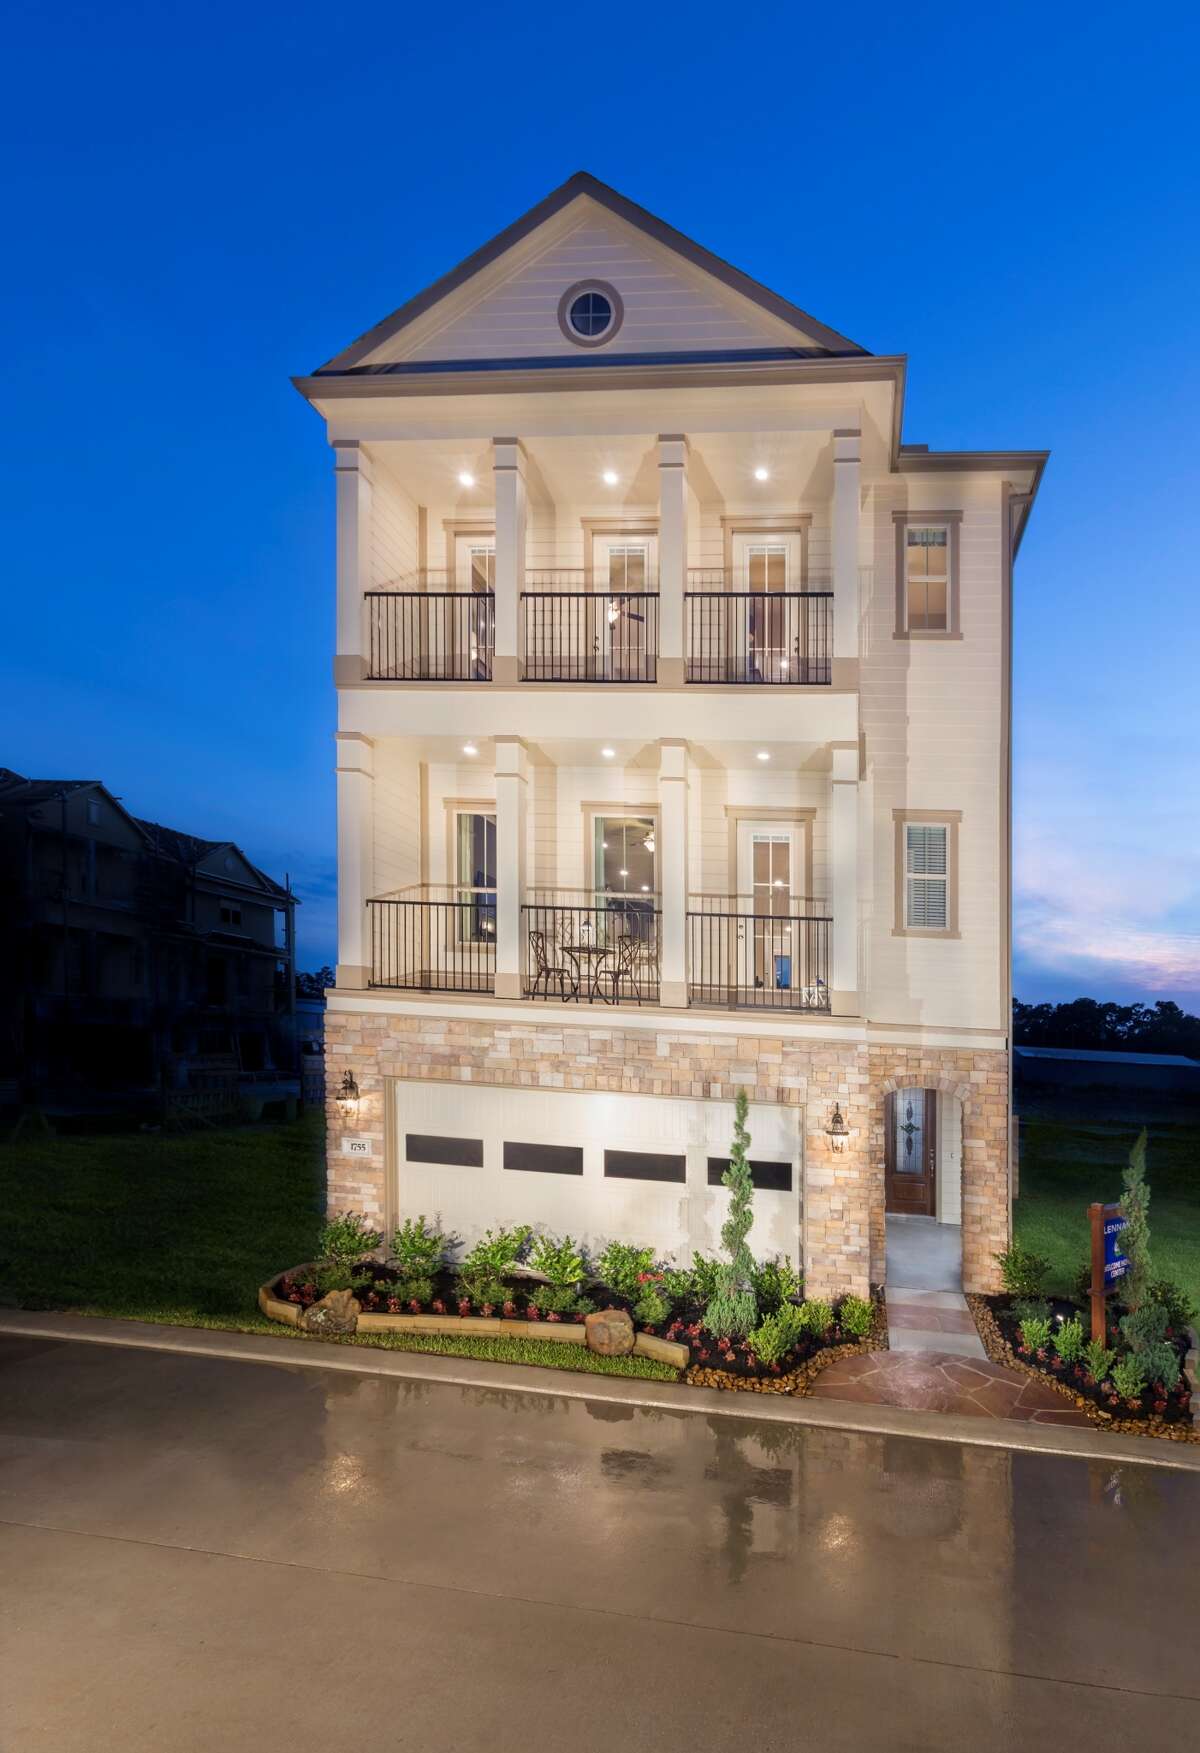 Three story townhomes in Knoll Park will range from 2,033 square feet to 2,728 square feet.